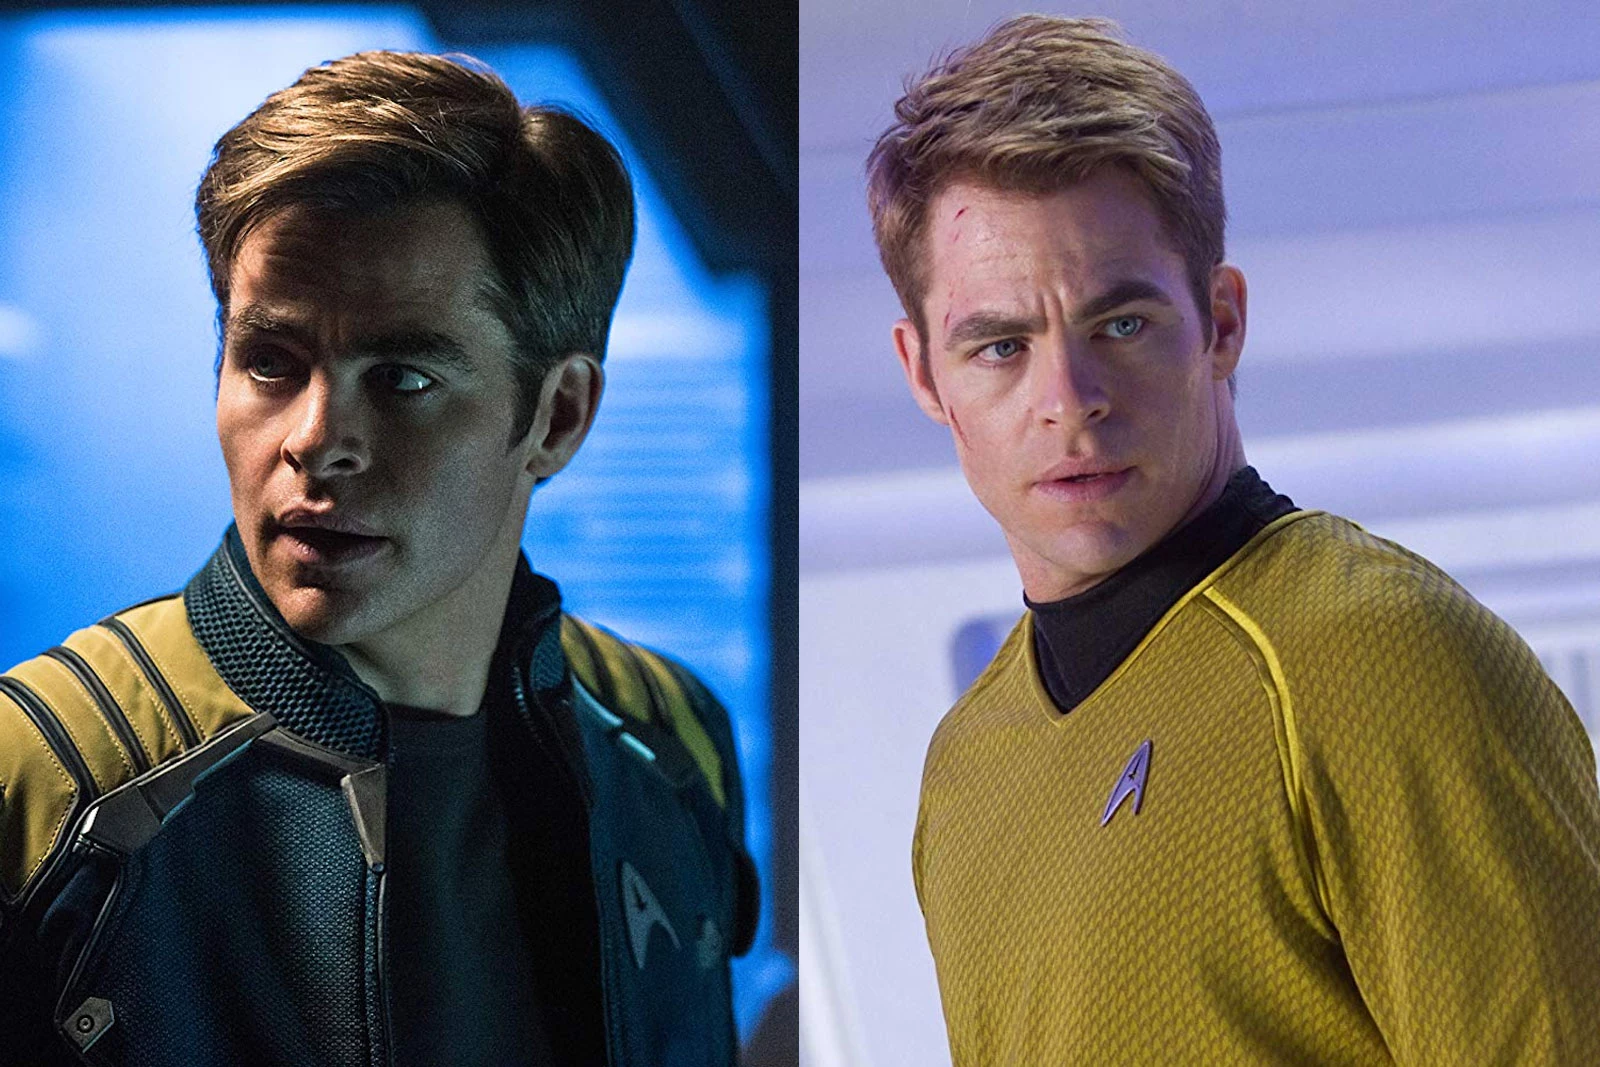 The Foolproof Way to Tell If a Modern Star Trek Will Be Good